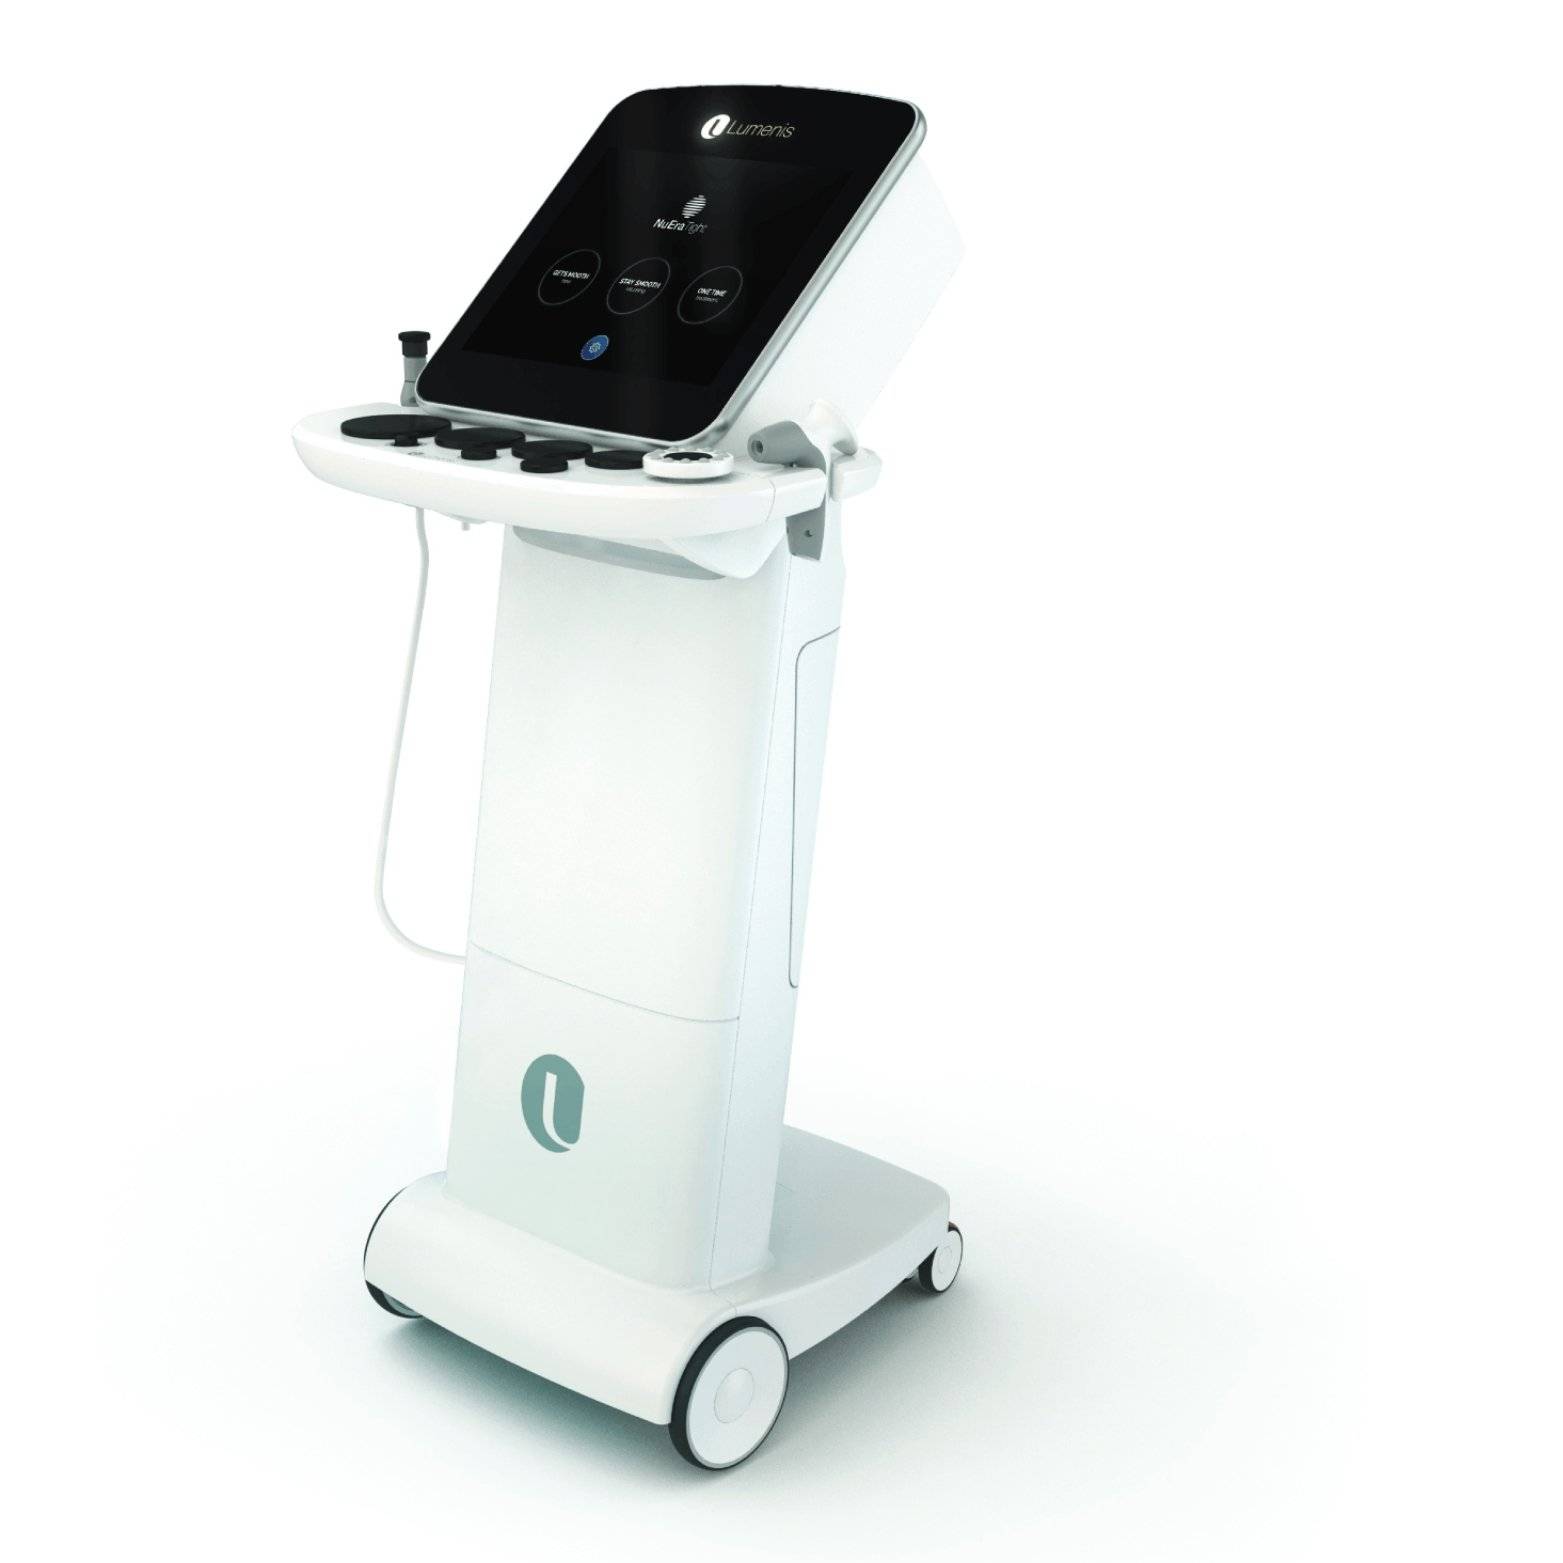 Cryo t star its sole independent machine